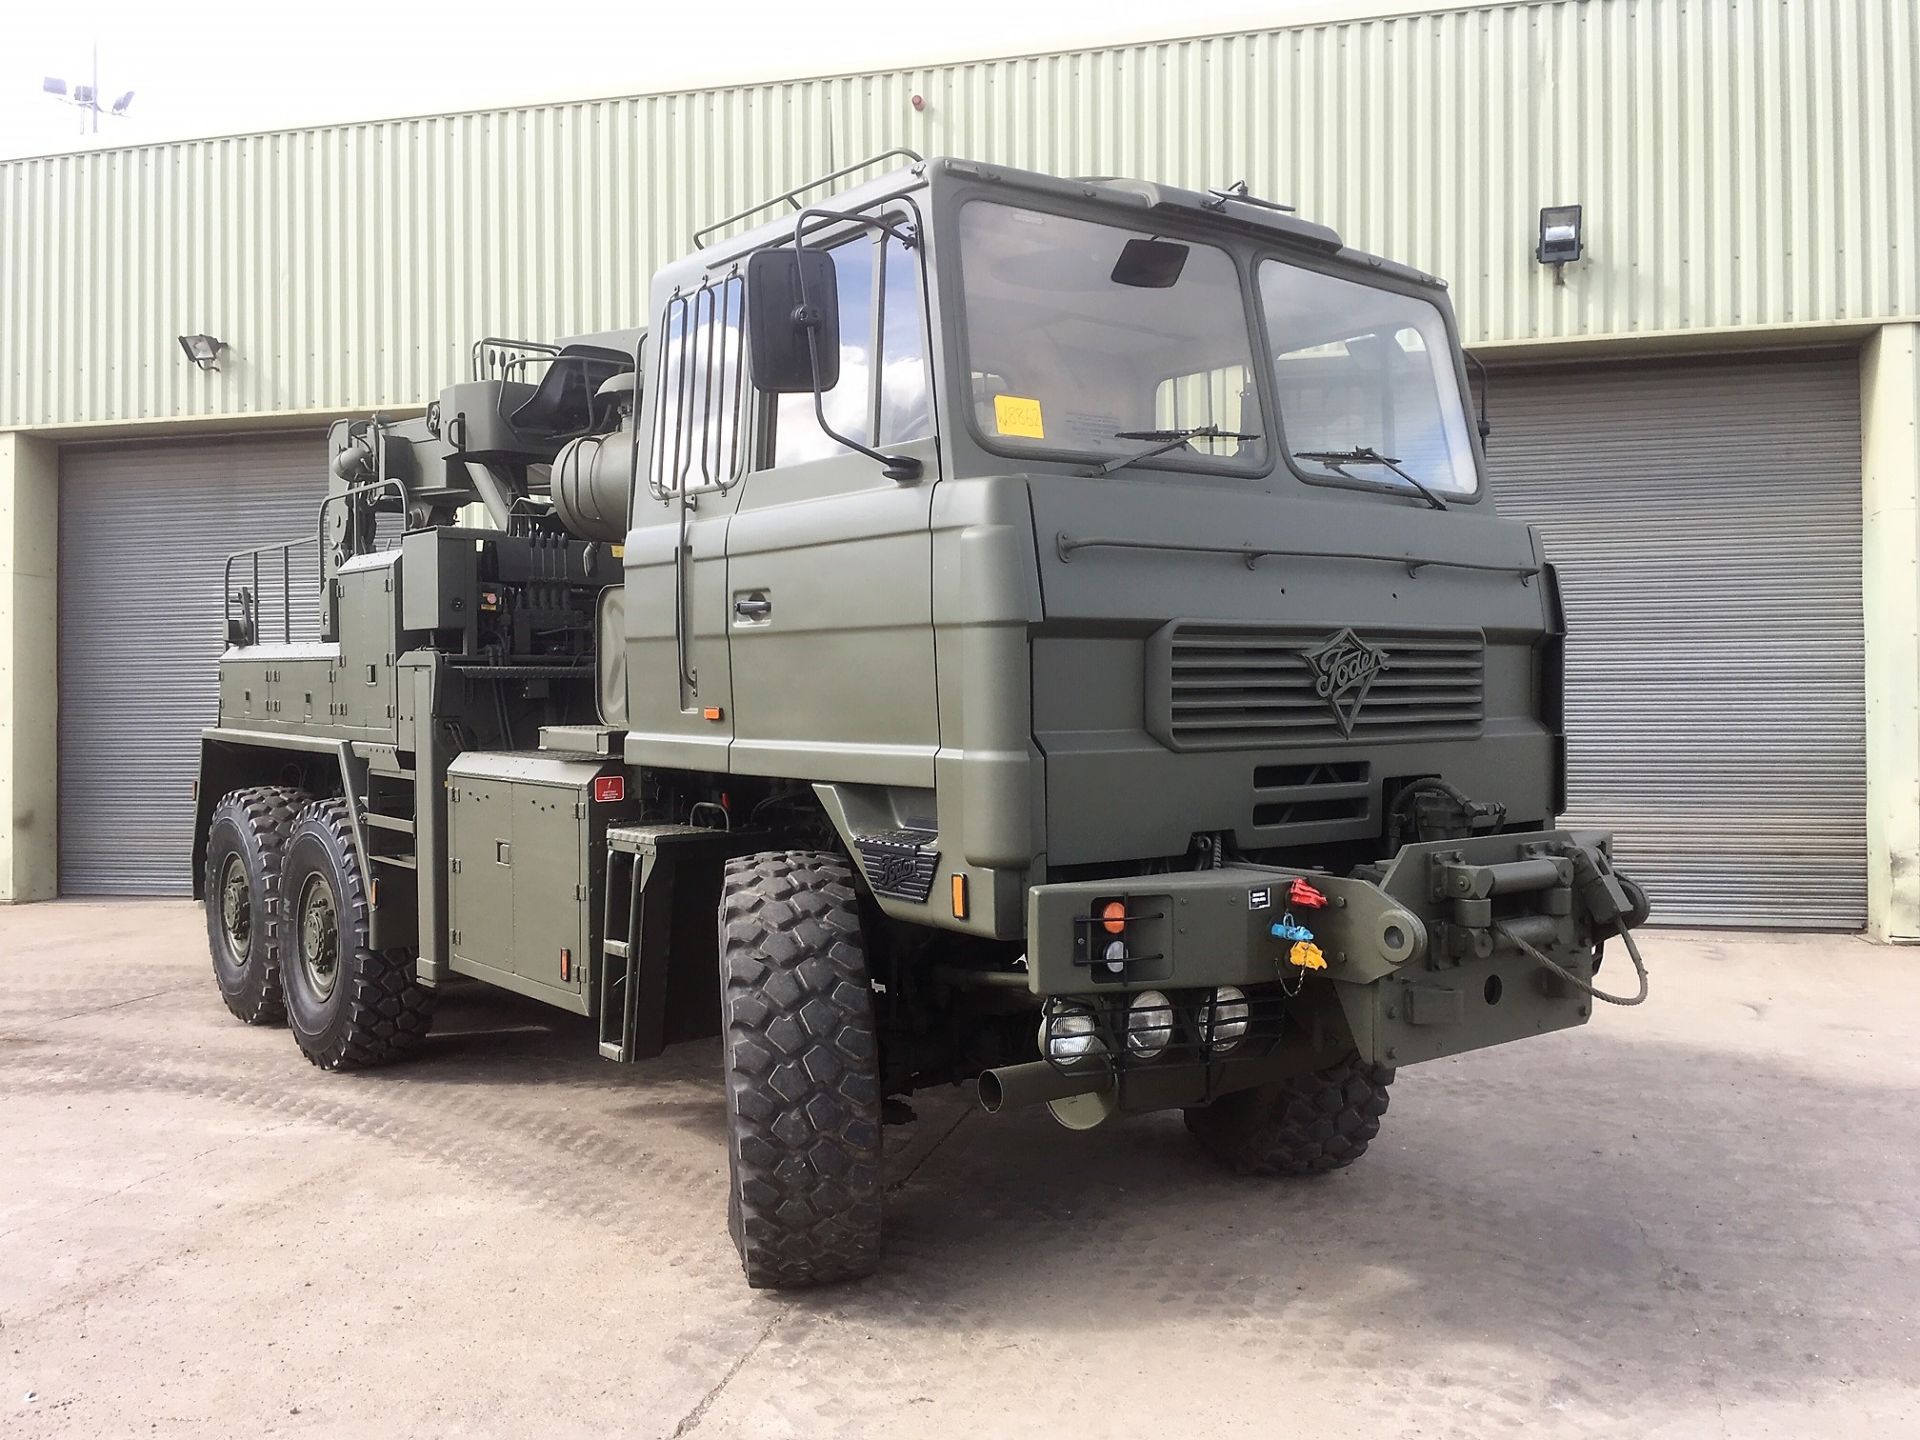 Foden 6x6 RHD Recovery Vehicle